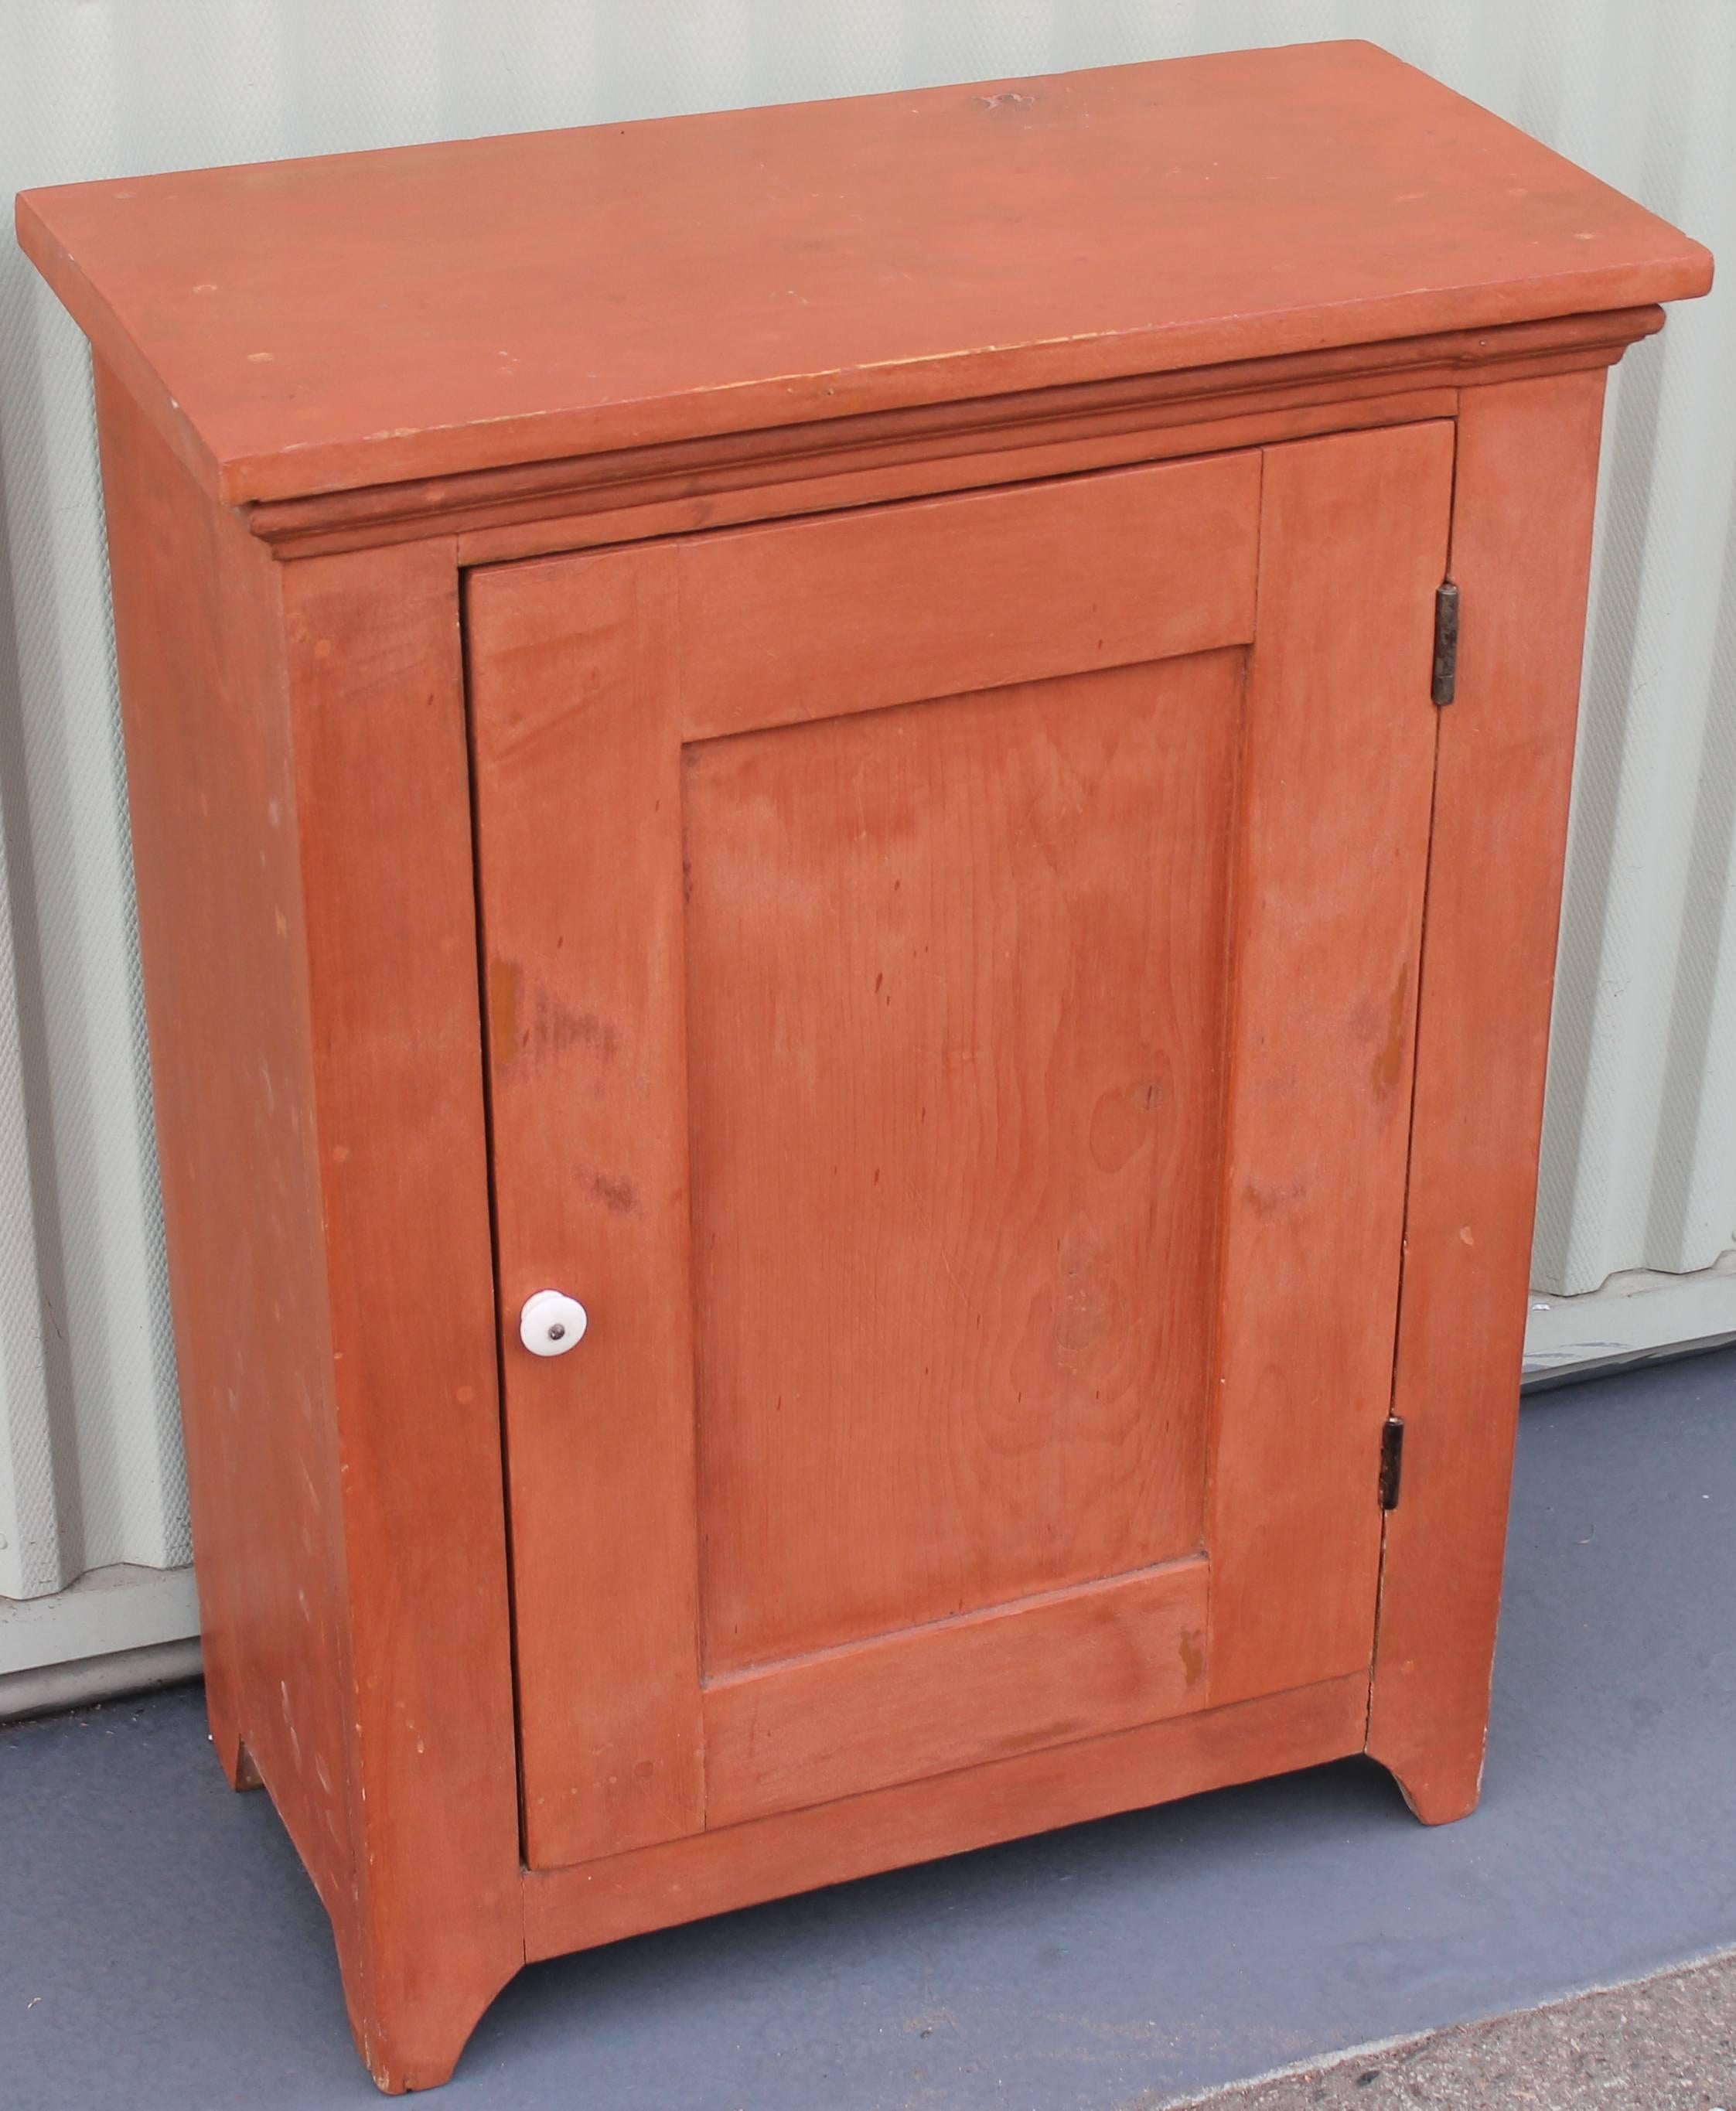 This amazing one-door cupboard was found in New England and is in great as found condition. The hardware is all original and the construction is square nails and wood pegs. The interior is in a over painted white surface. This cupboard can sit on